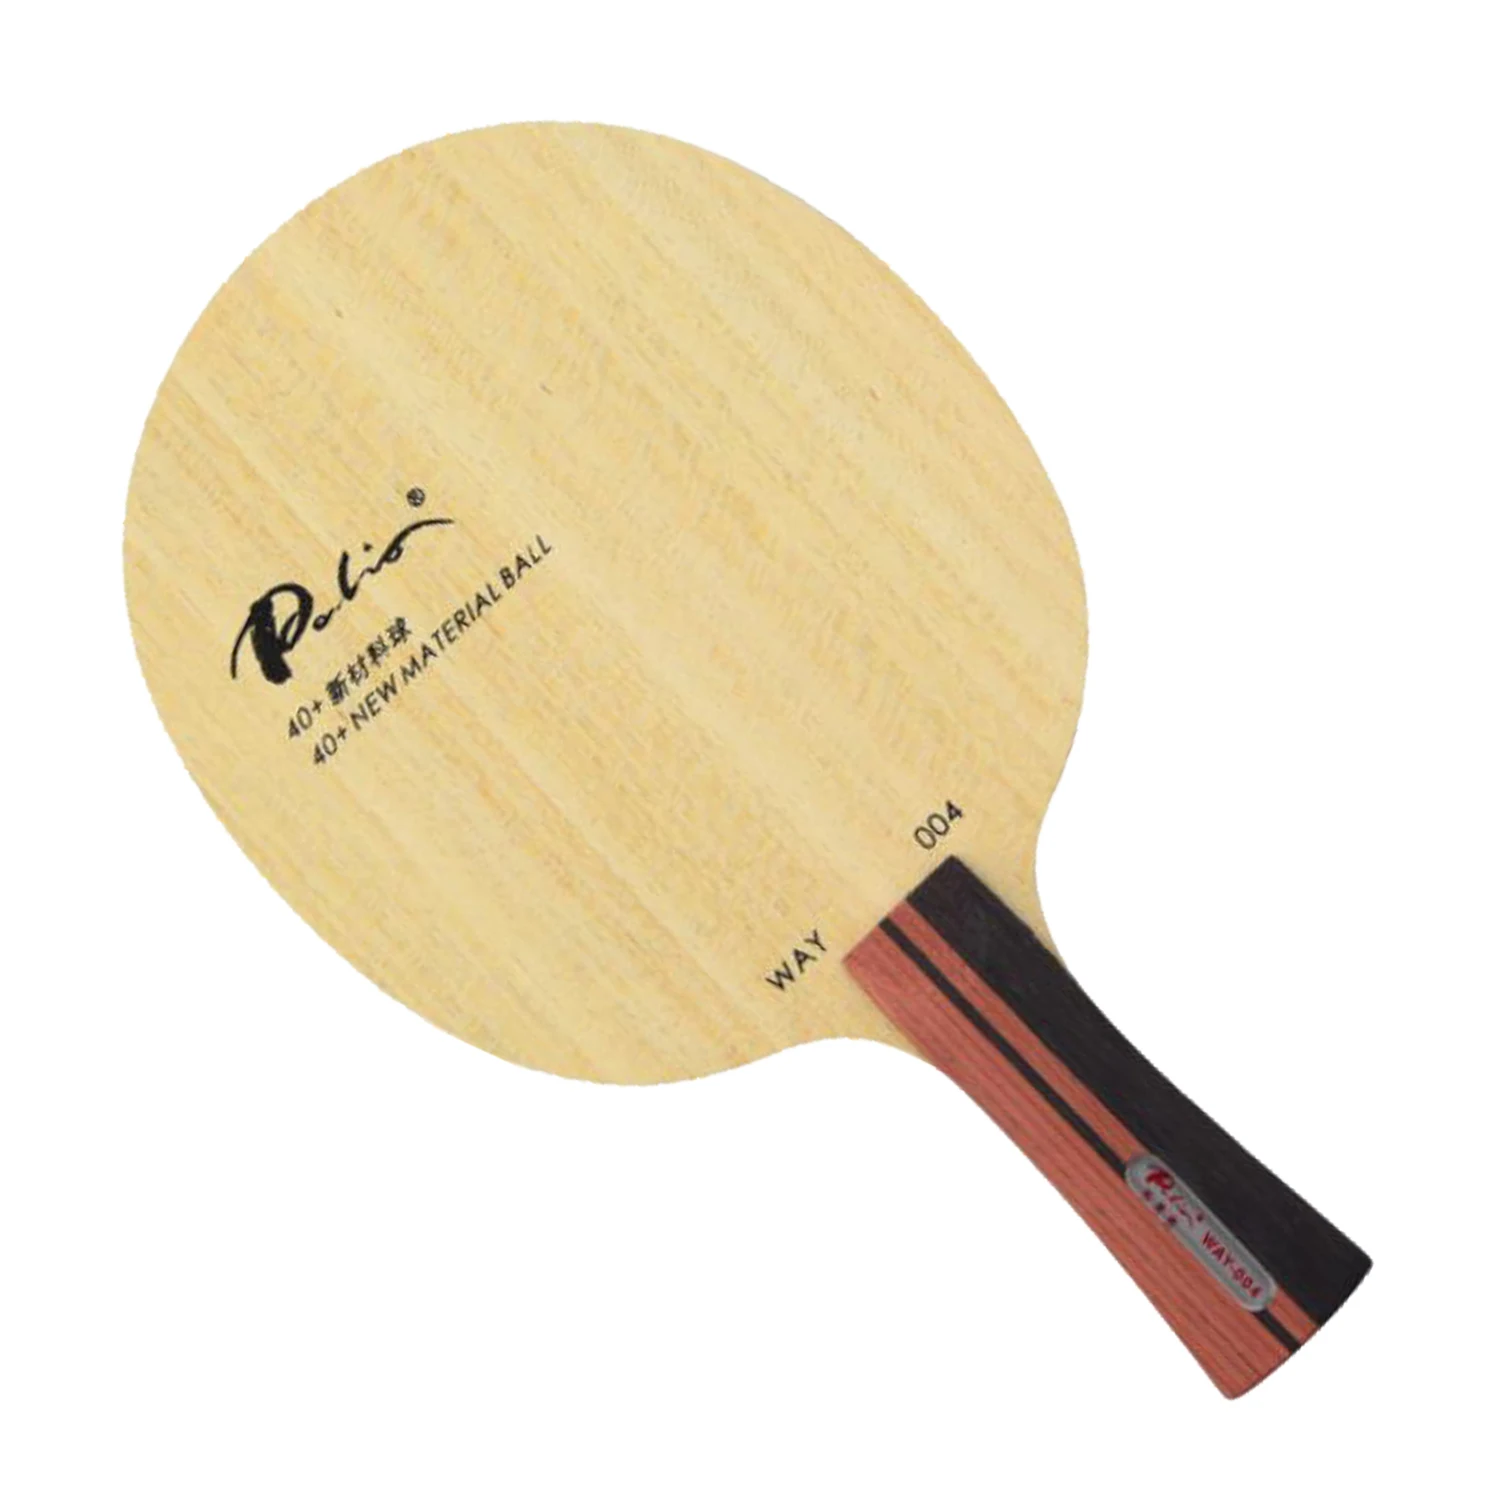 

Palio official way004 way 004 table tennis blade pure wood for 40+ new material table tennis racket sports racquet sports